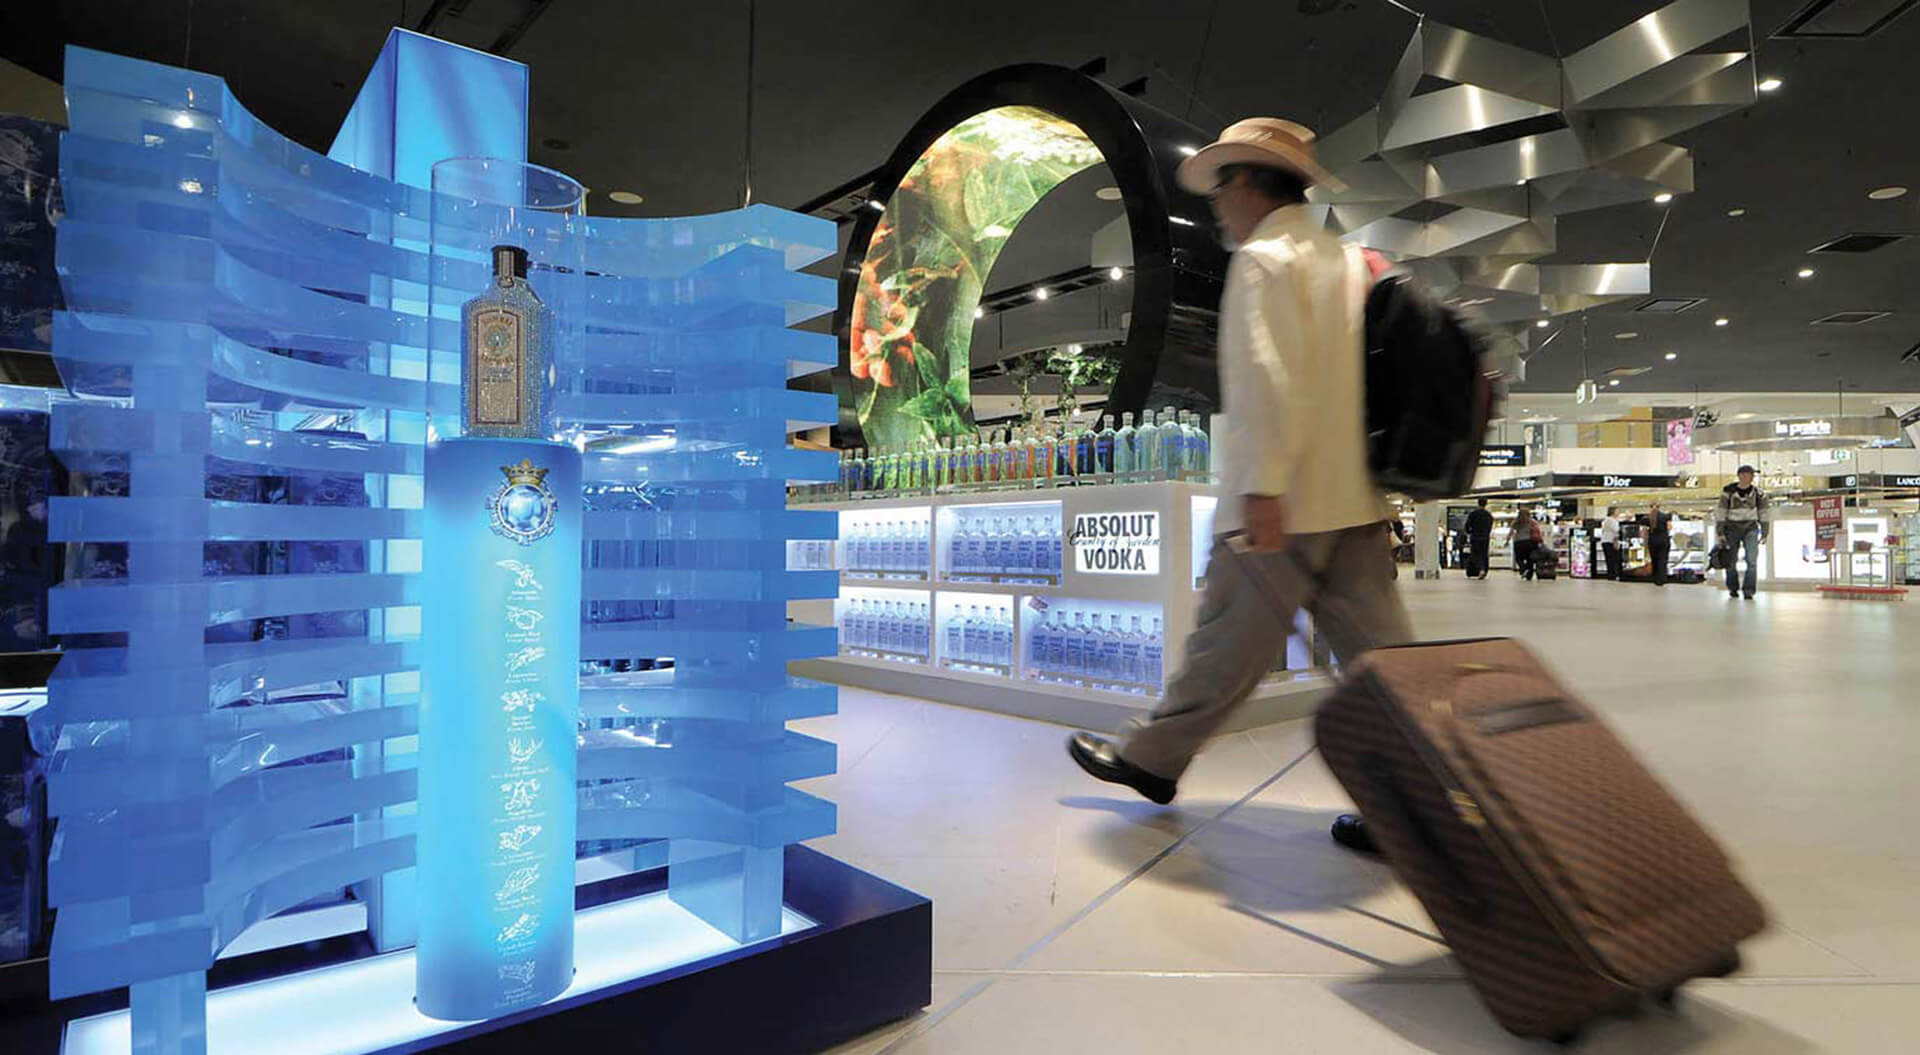 Bacardi Global Travel Retail, Bombay Sapphire spirits industry promotion campaigns at Sydney airport for duty free 